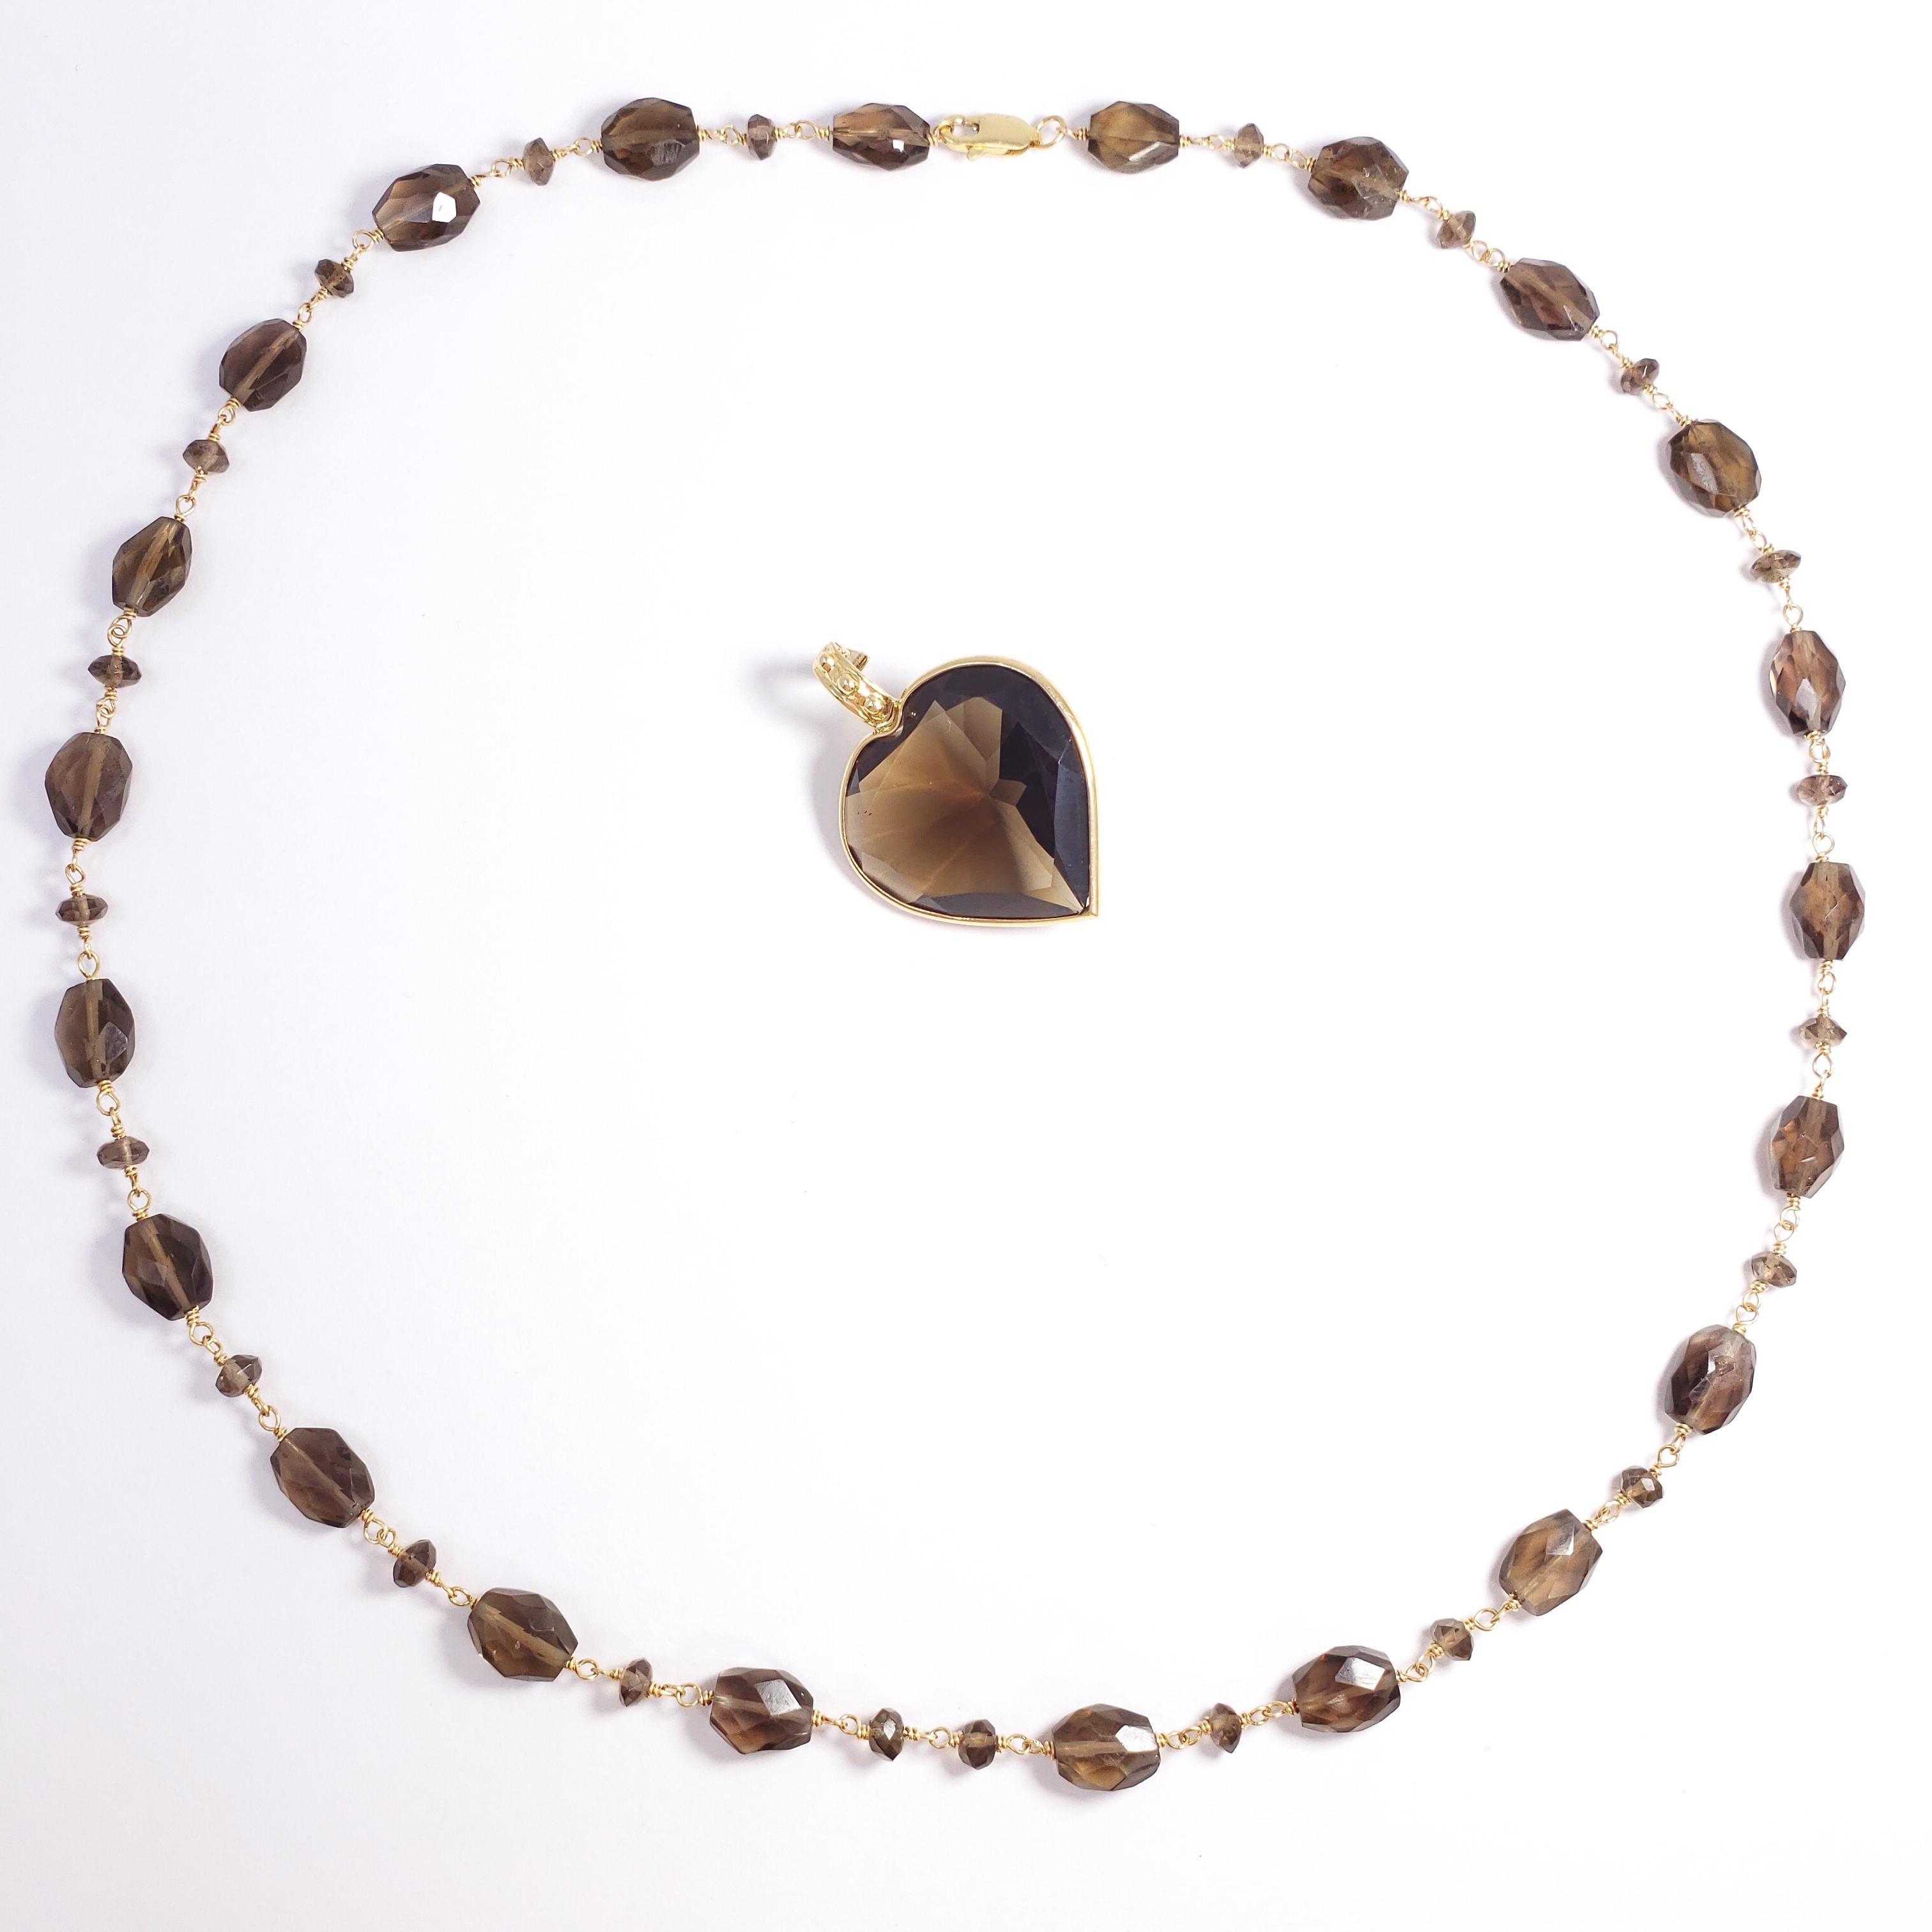 An elegant removeable pendant necklace, featuring a faceted quartz heart pendant on a 14K yellow gold chain, accented with faceted smoky brown quartz beads. A stylish piece!

Hallmarks: 14K, 1BB

Necklace length - 50.5cm
Pendant dimensions - 2.7cm x